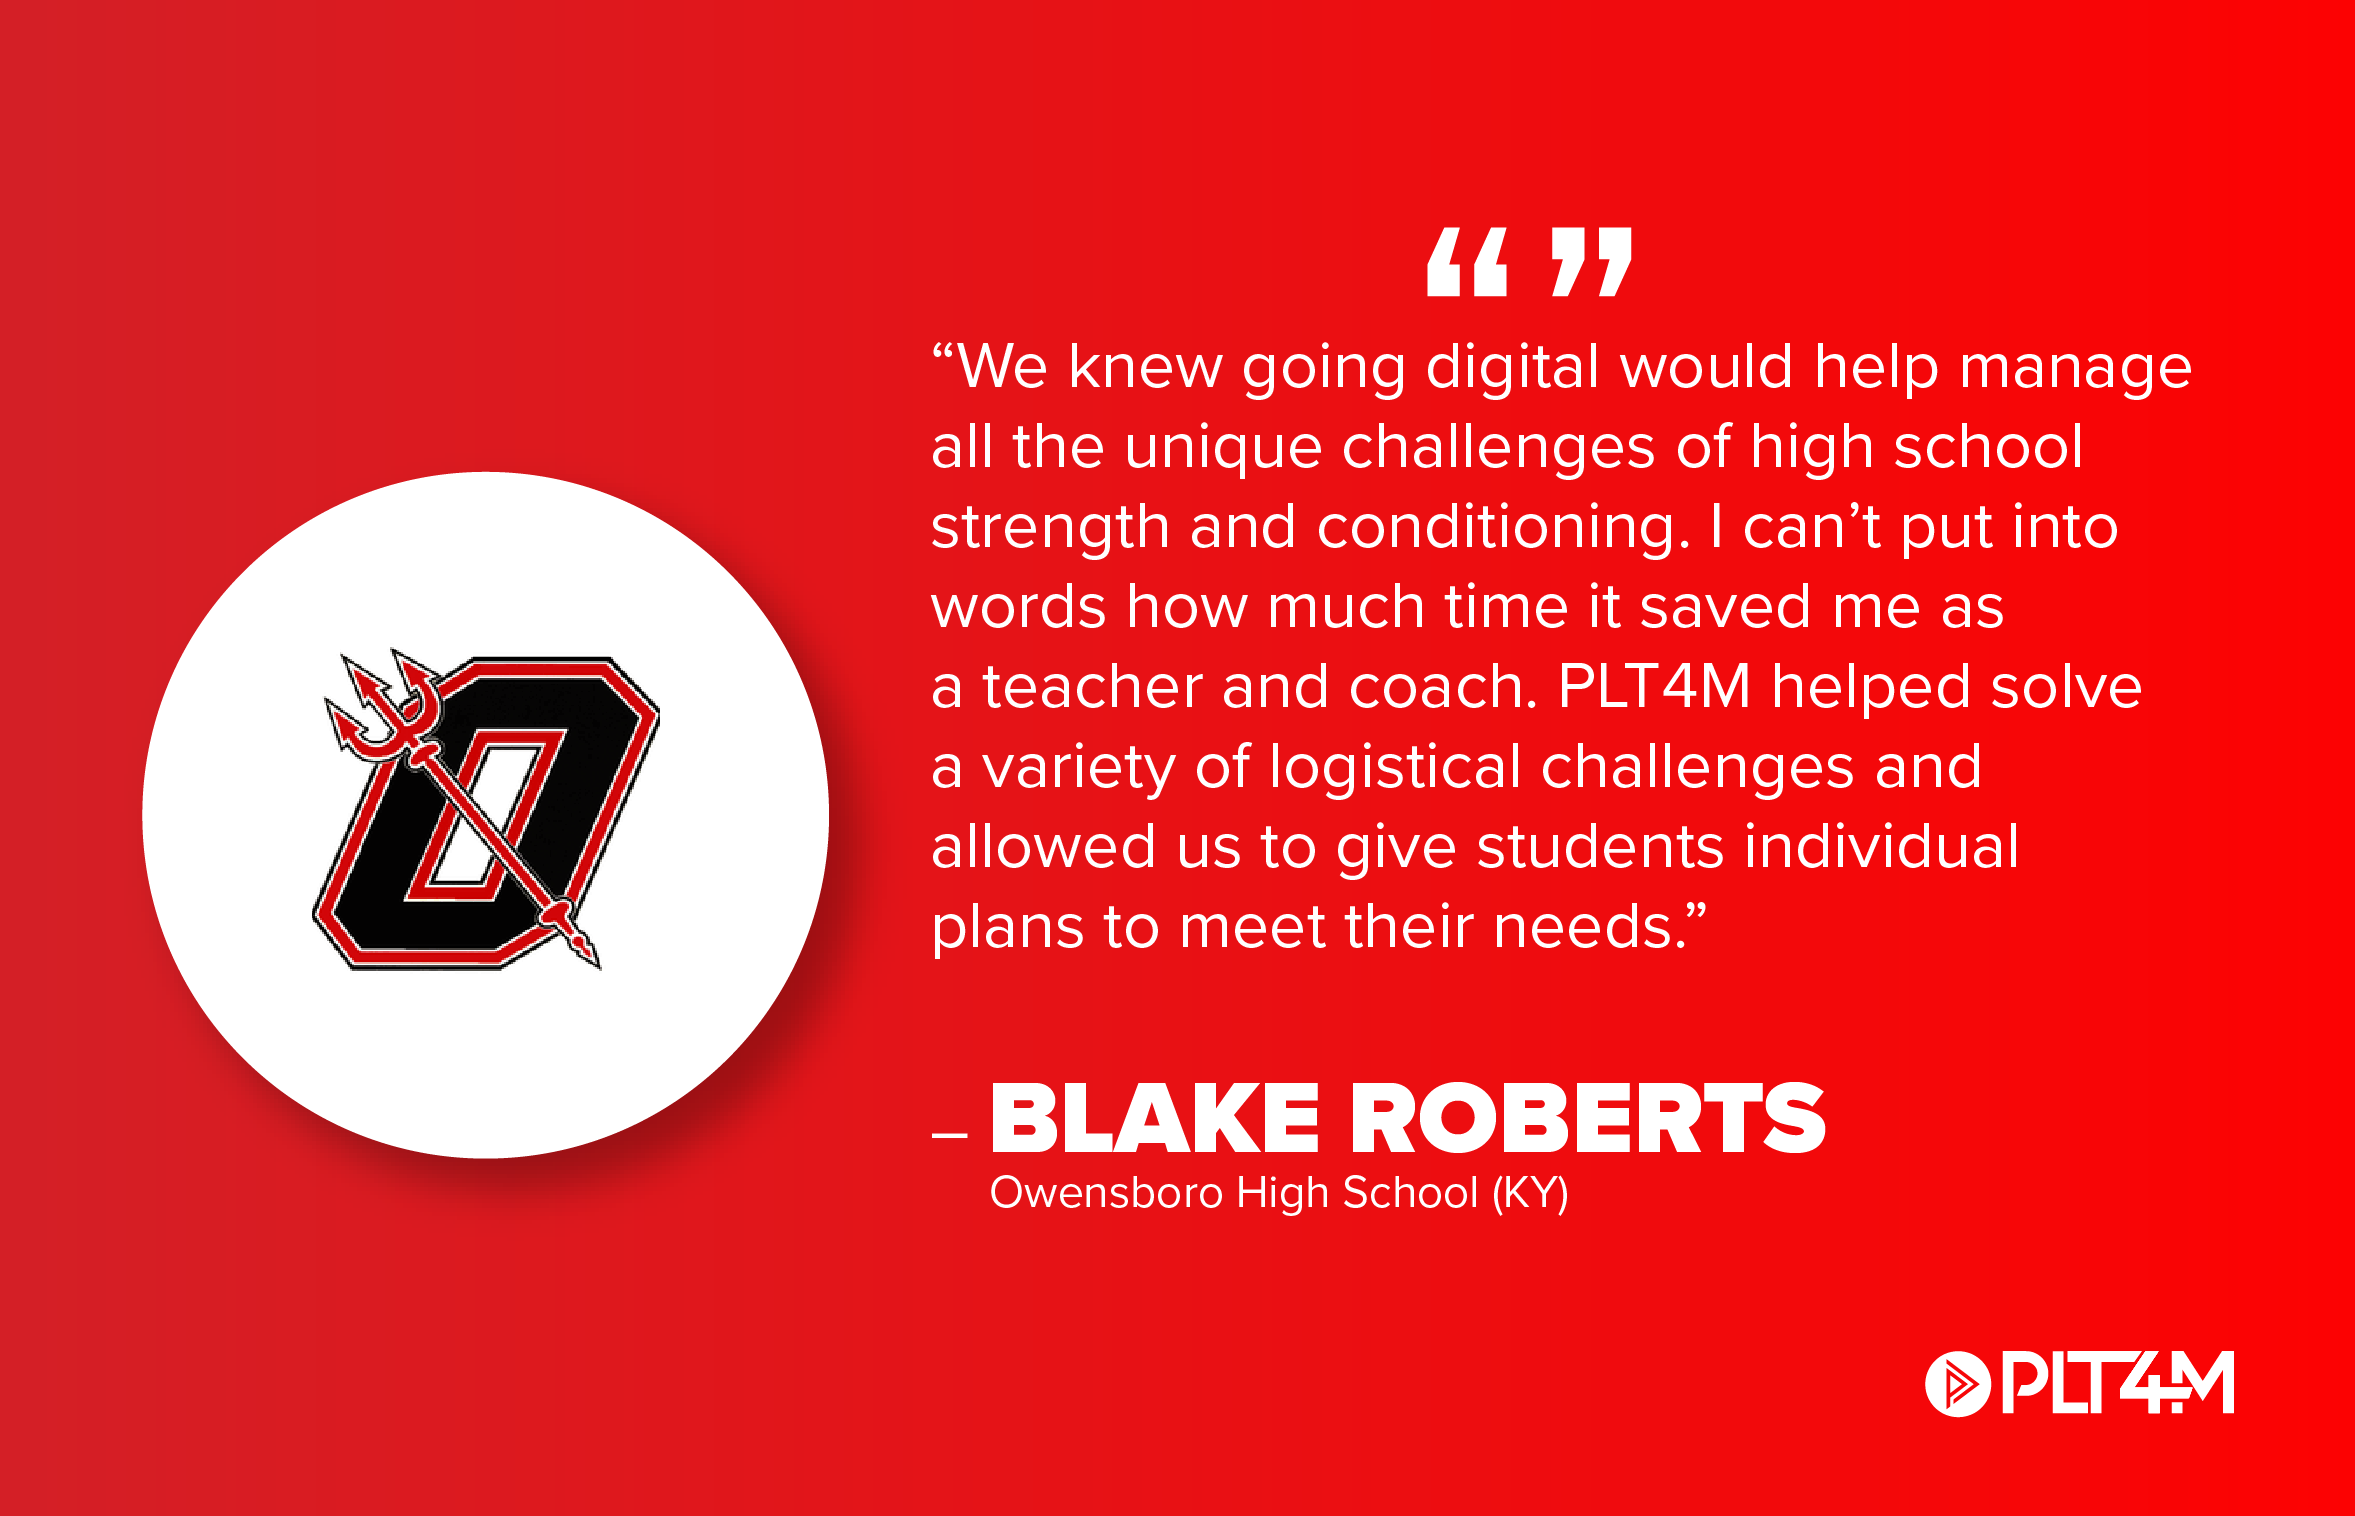 Quote board from Blake Roberts - Owensboro High School in Kentucky.